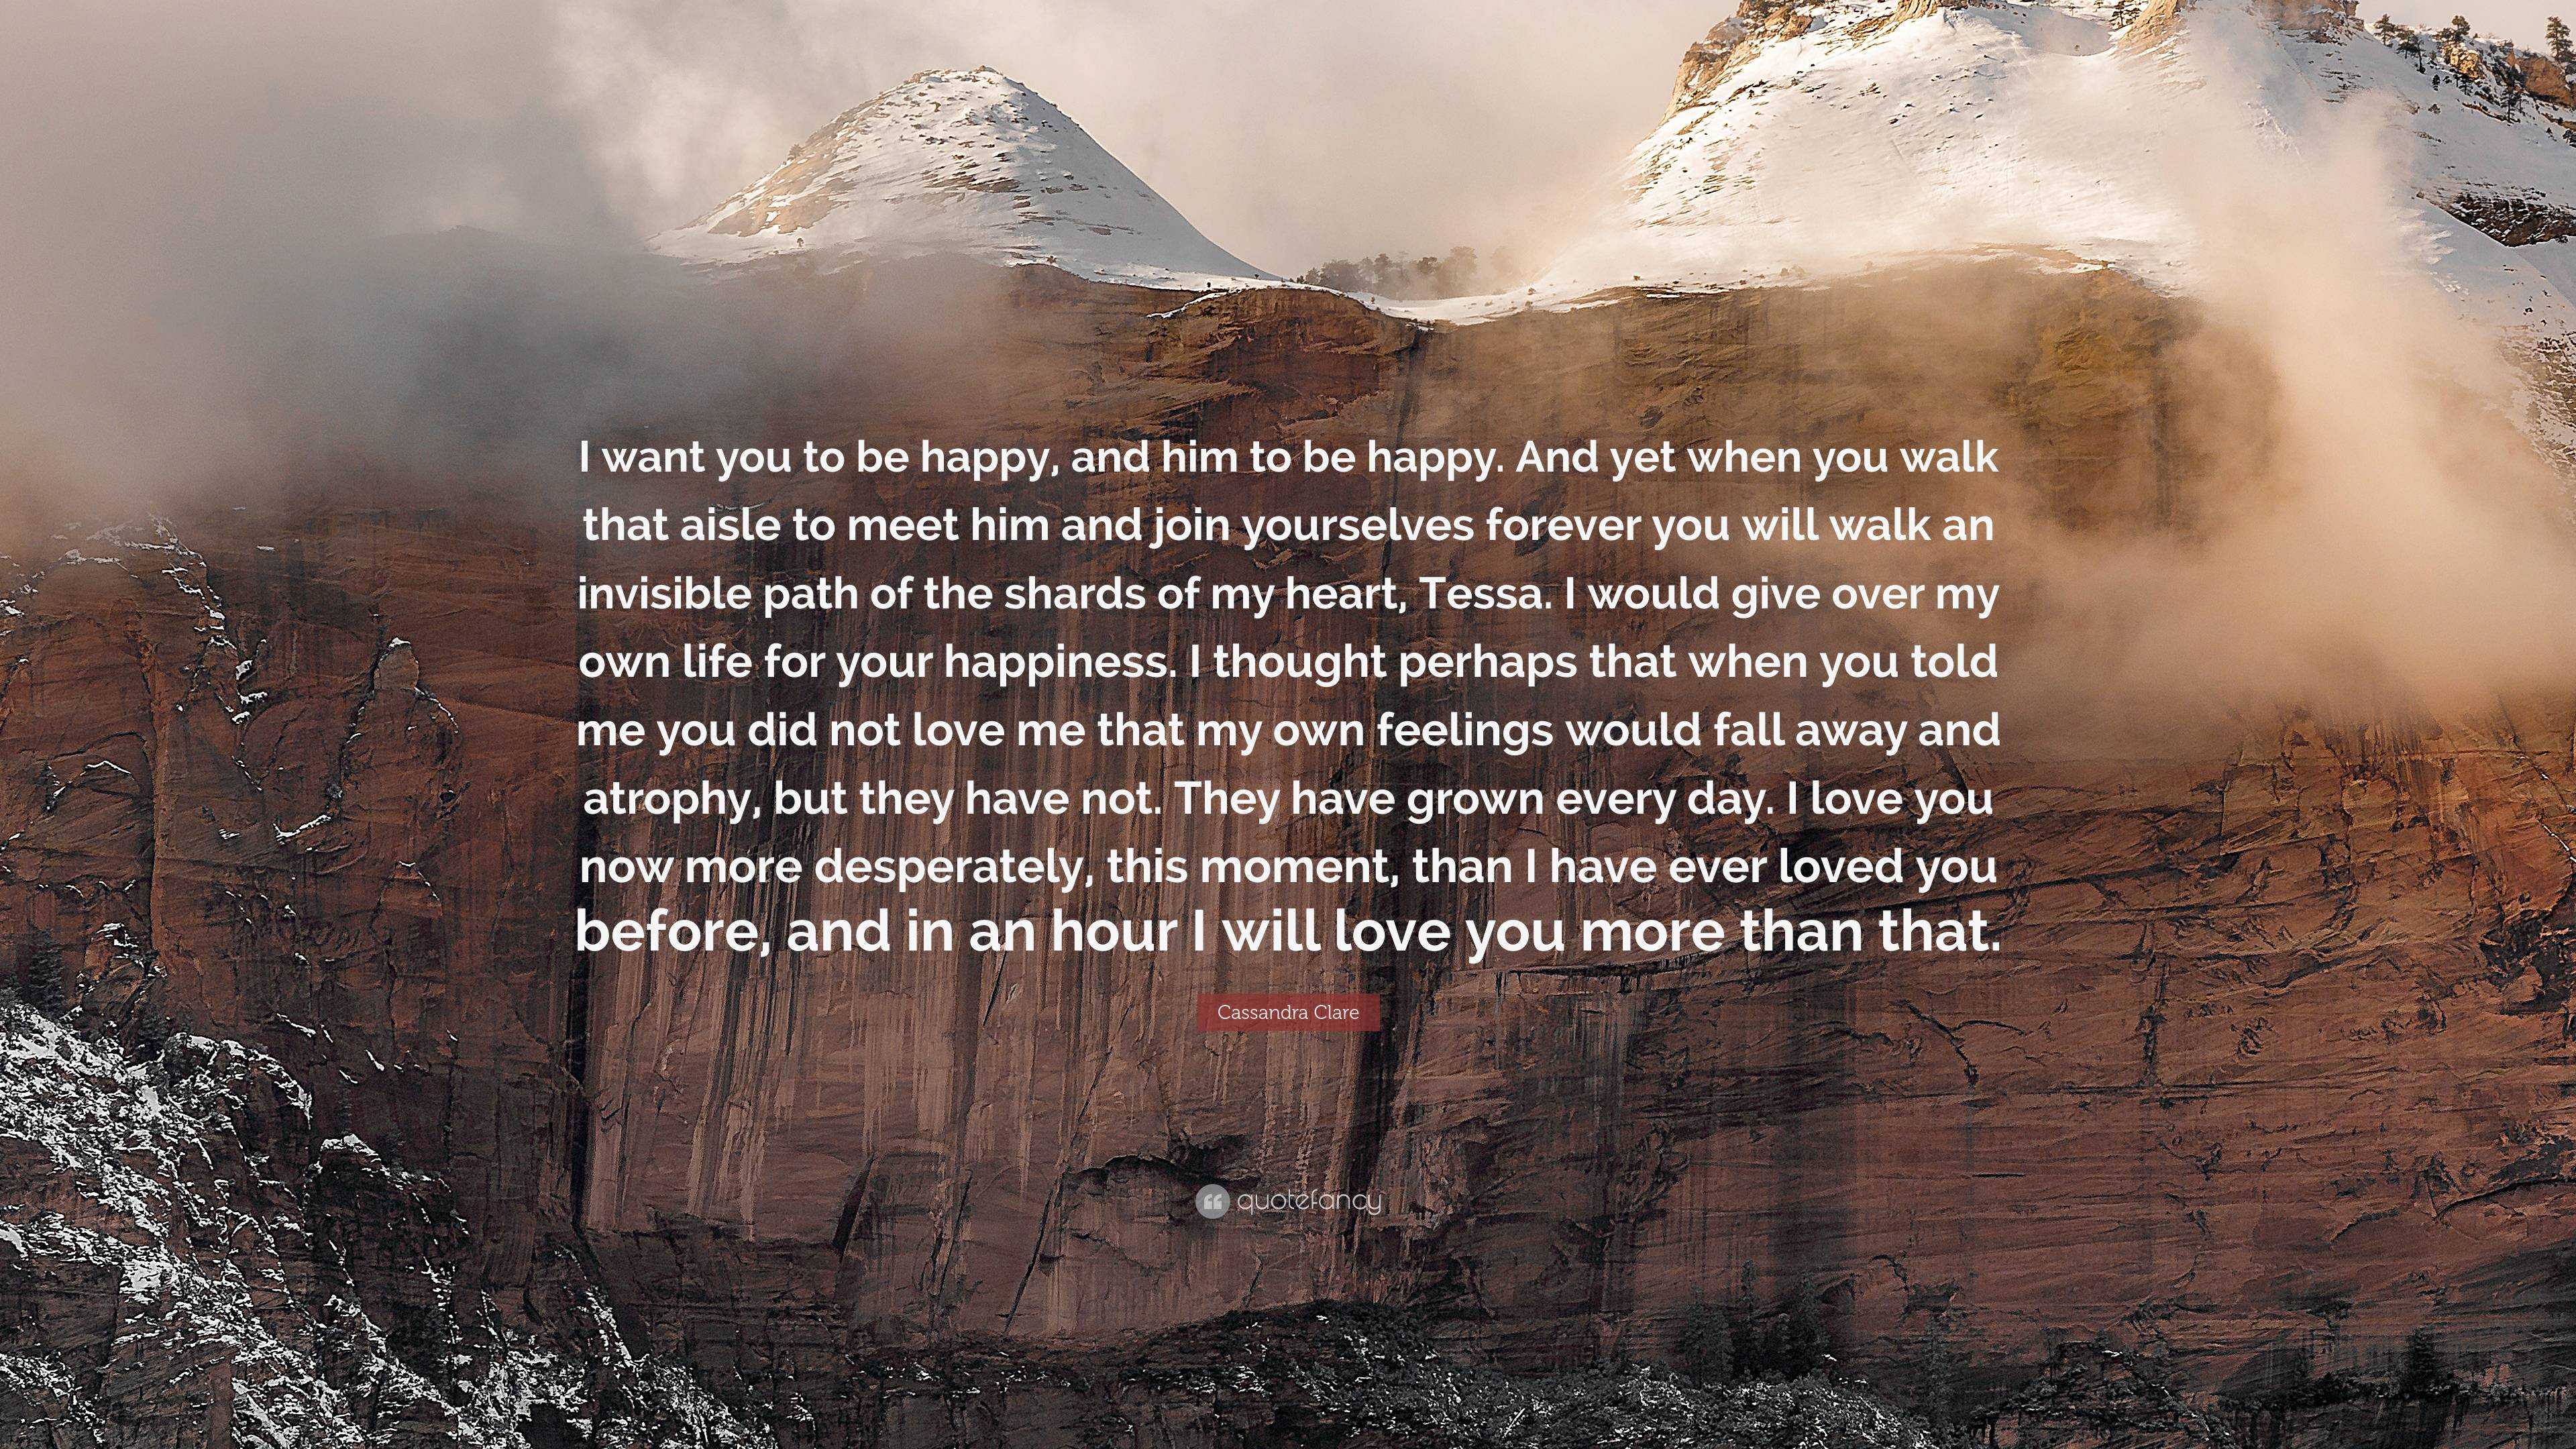 Cassandra Clare Quote: “I want you to be happy, and him to be happy